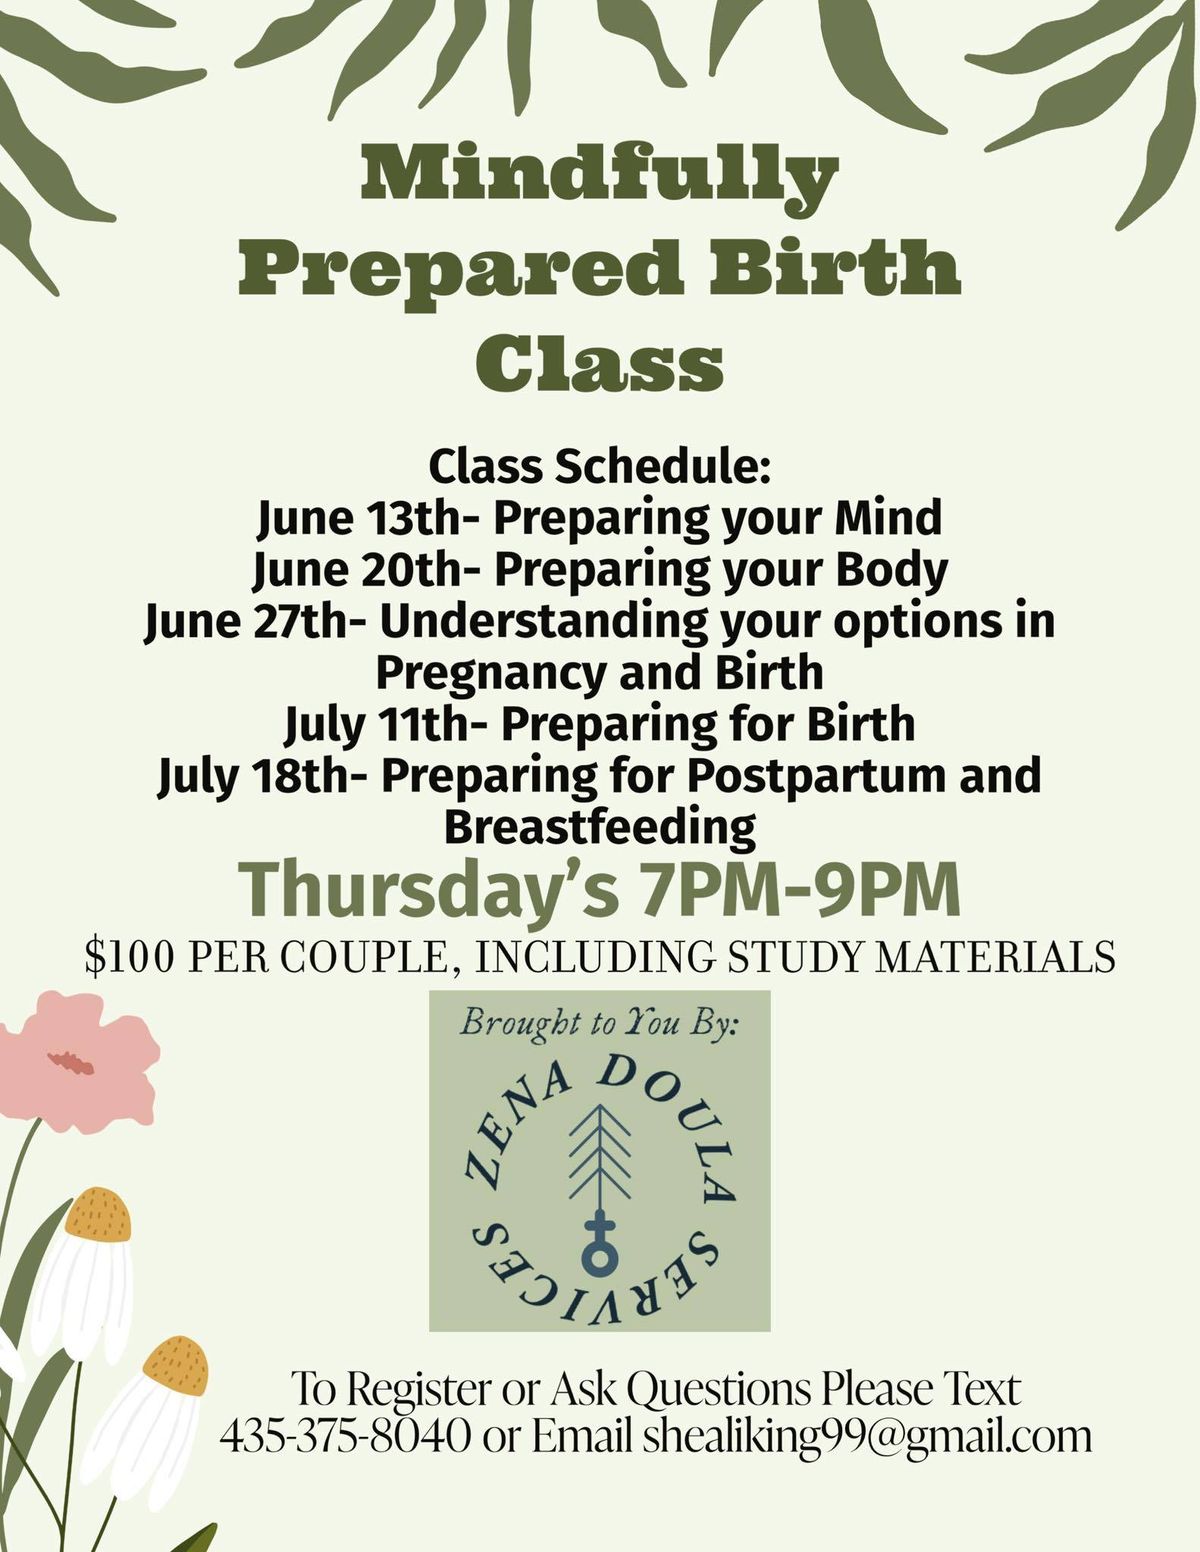 Mindfully Prepared Birth Education Course